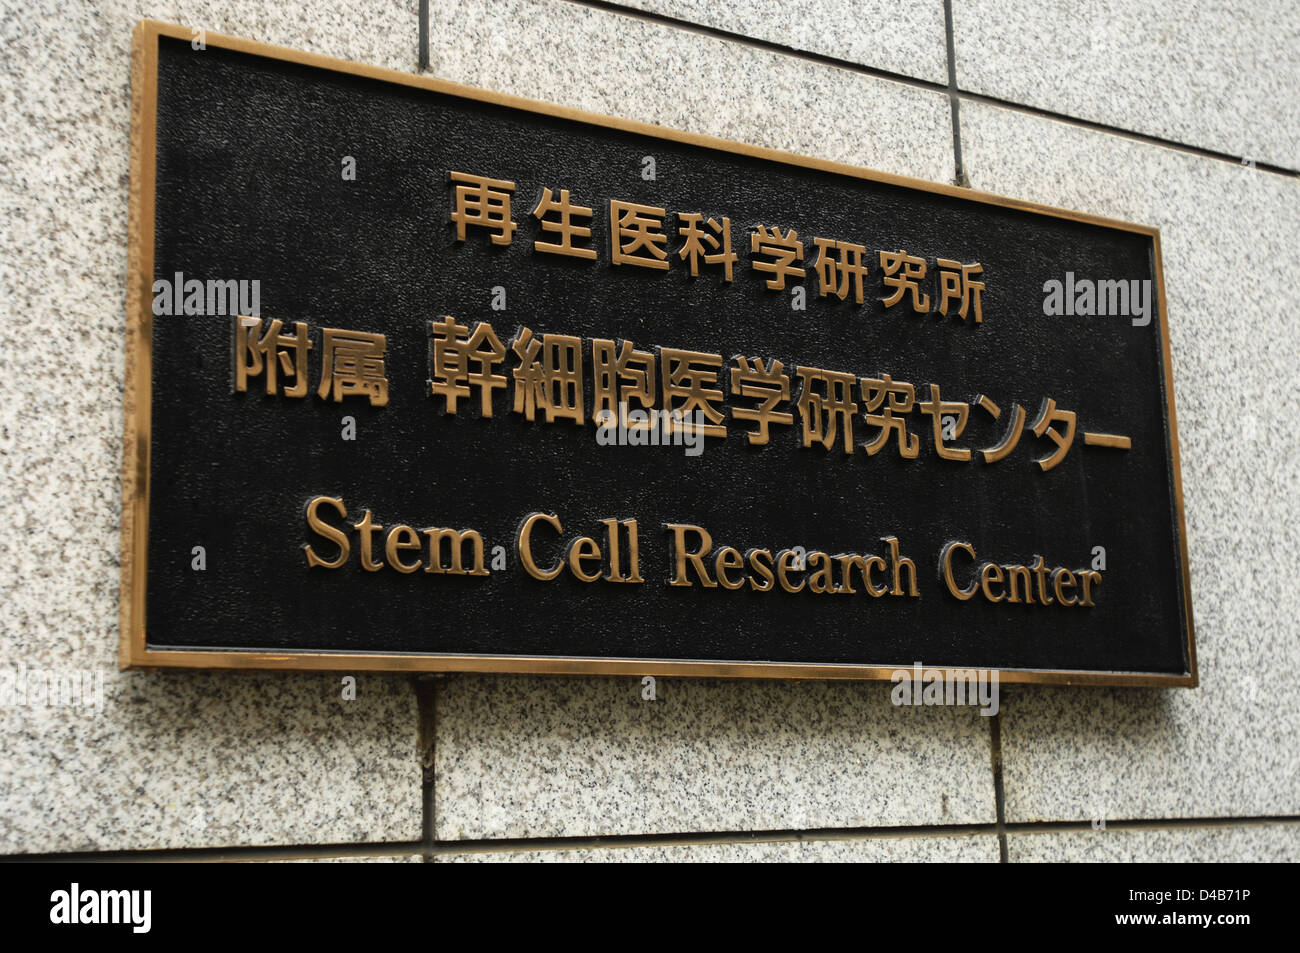 Japan, Kyoto University, wall sign for The Institute of Frontier Medical Sciences Stock Photo